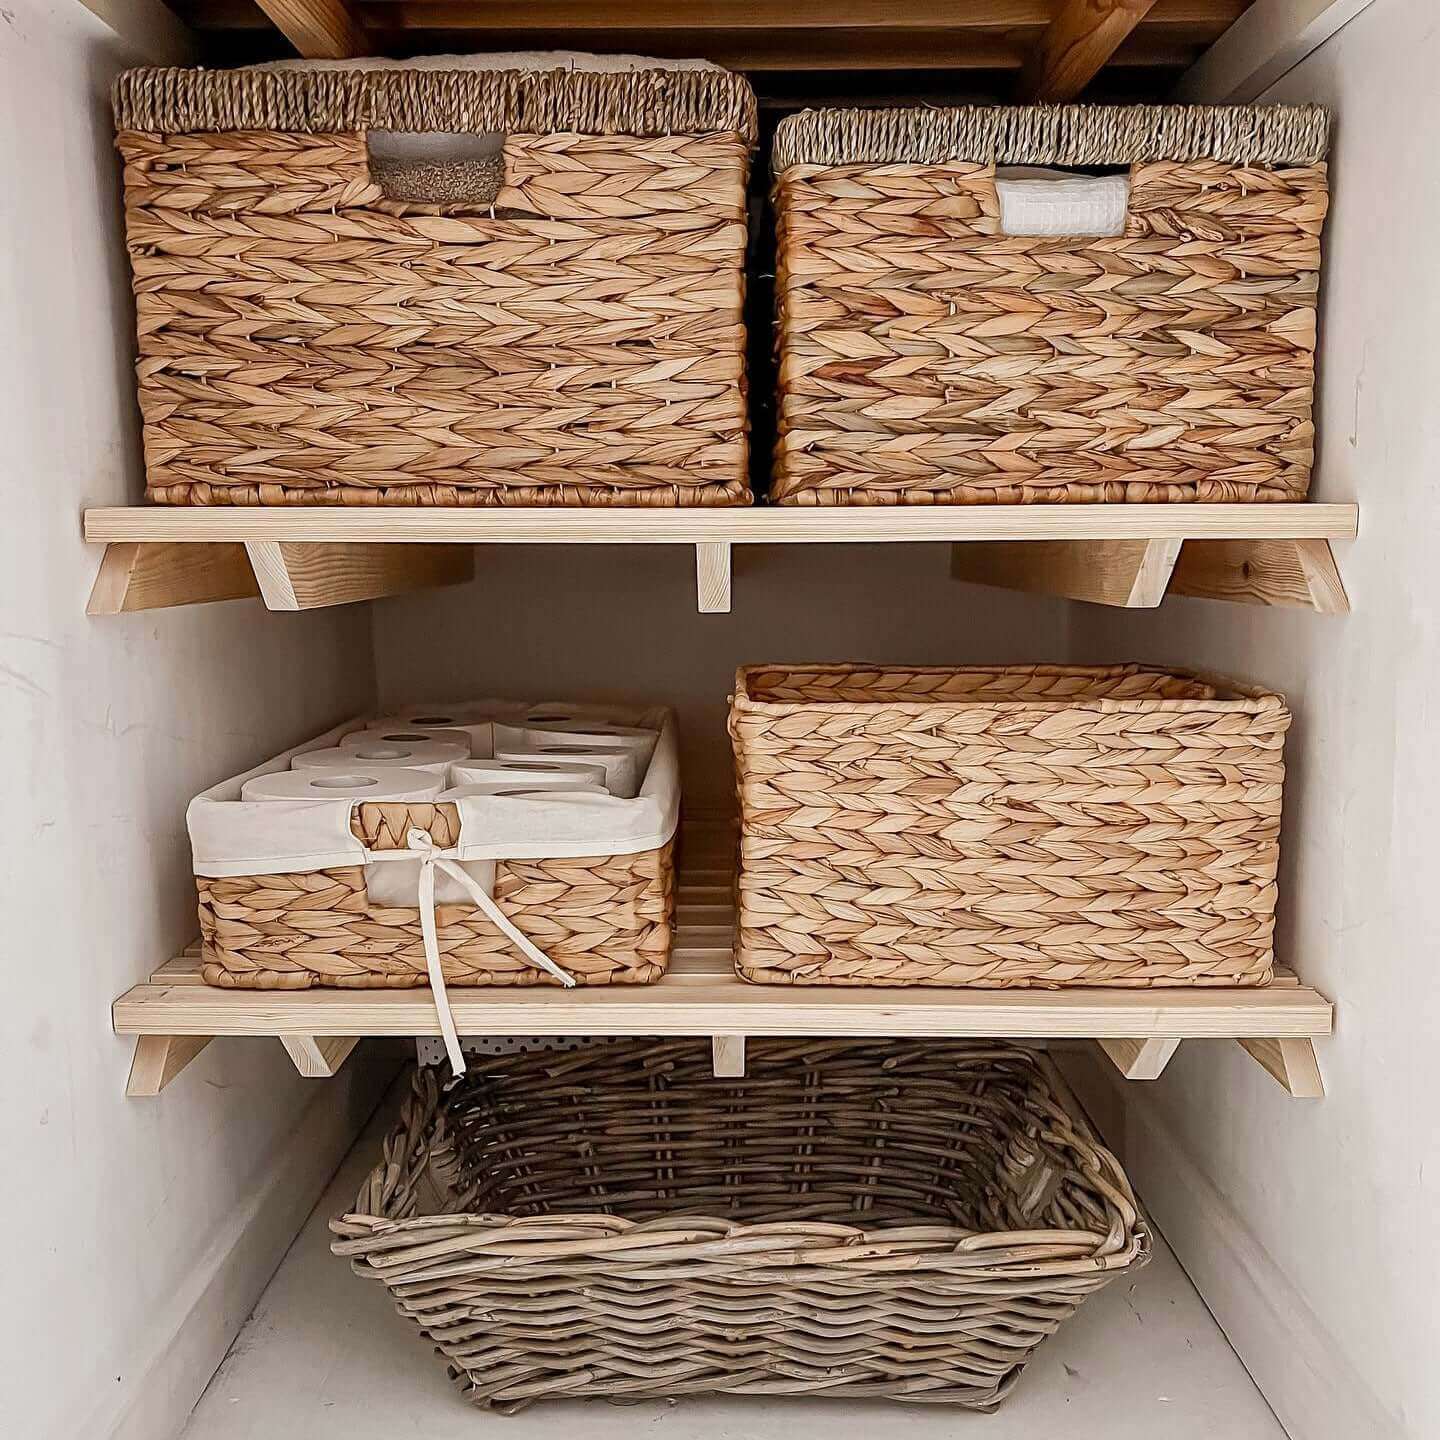 Airing Cupboard Wooden Slatted Shelves - 71 cm by 65 cm